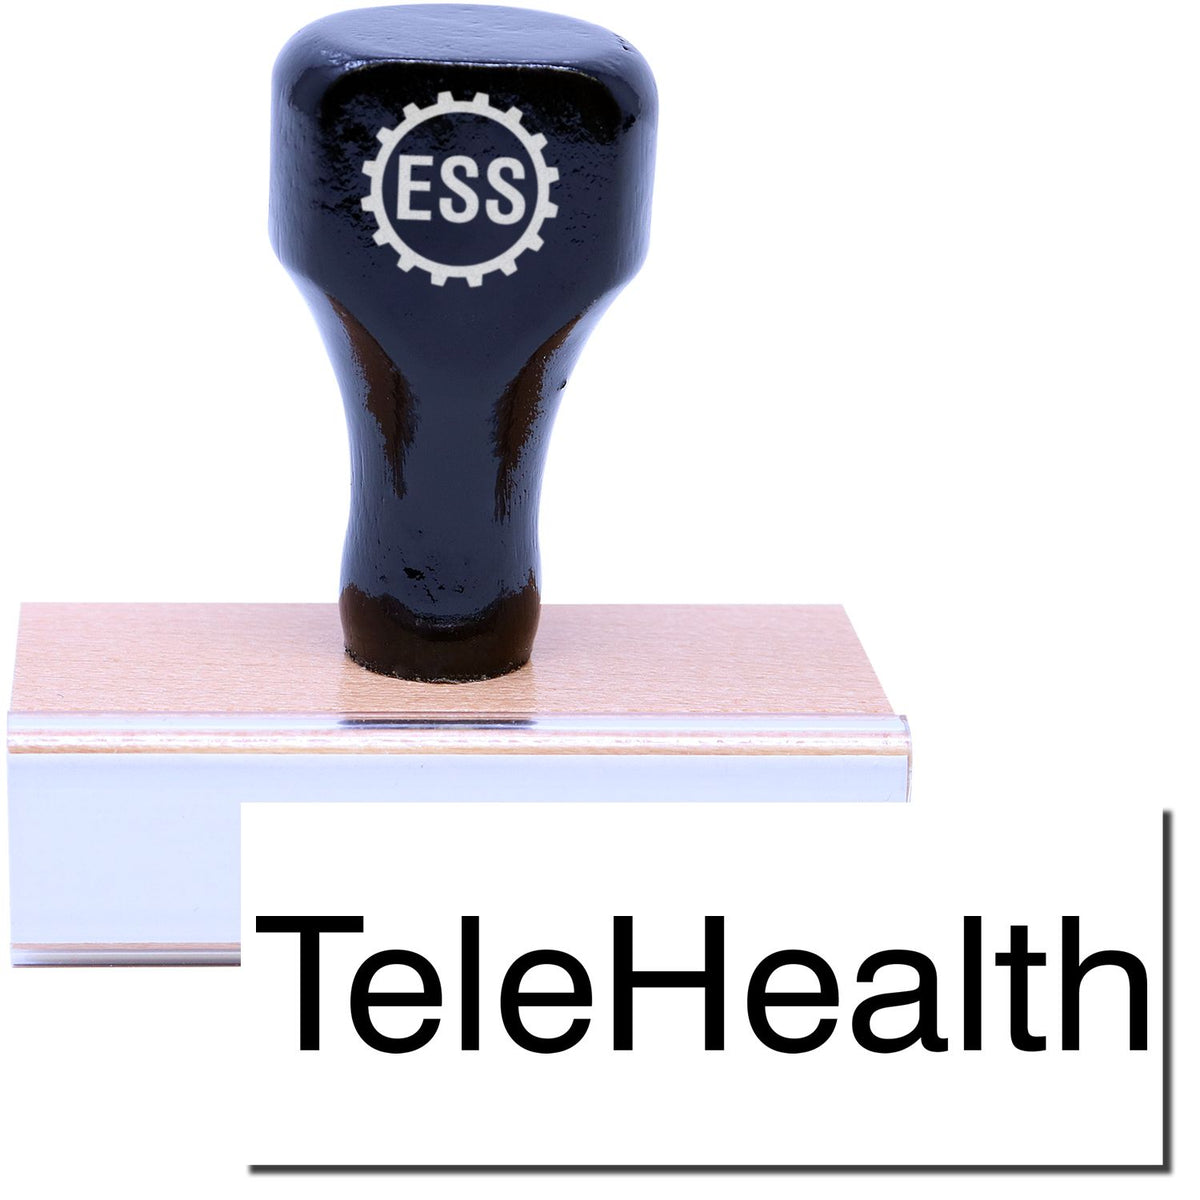 A stock office rubber stamp with a stamped image showing how the text &quot;TeleHealth&quot; in a large font is displayed after stamping.